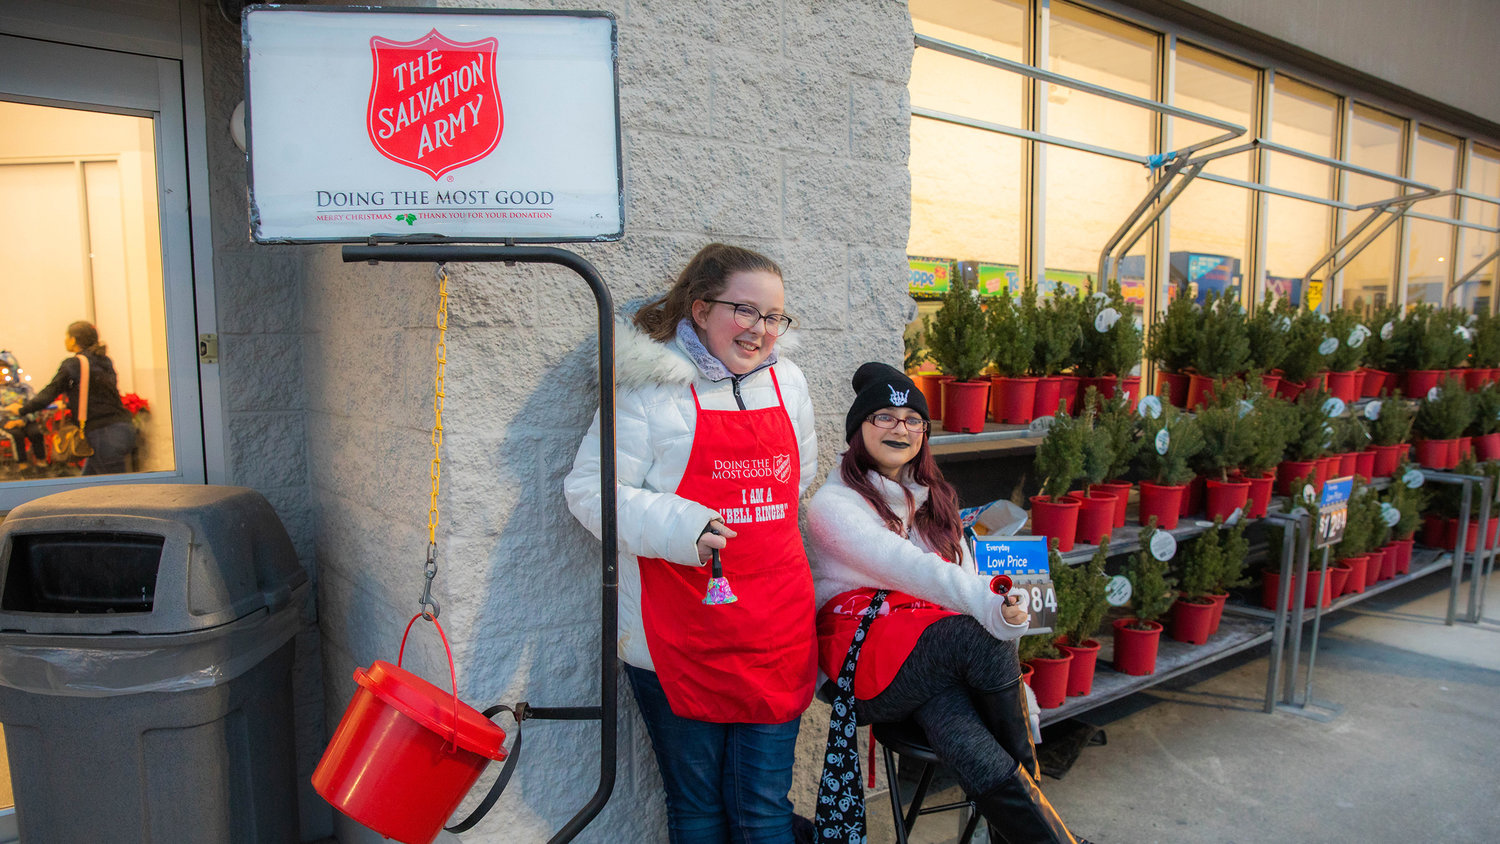 Riley Pack, 14, and Kara Martinson, 14, smile while bellringing for The Salvation Army outside Walmart in Chehalis on Monday.